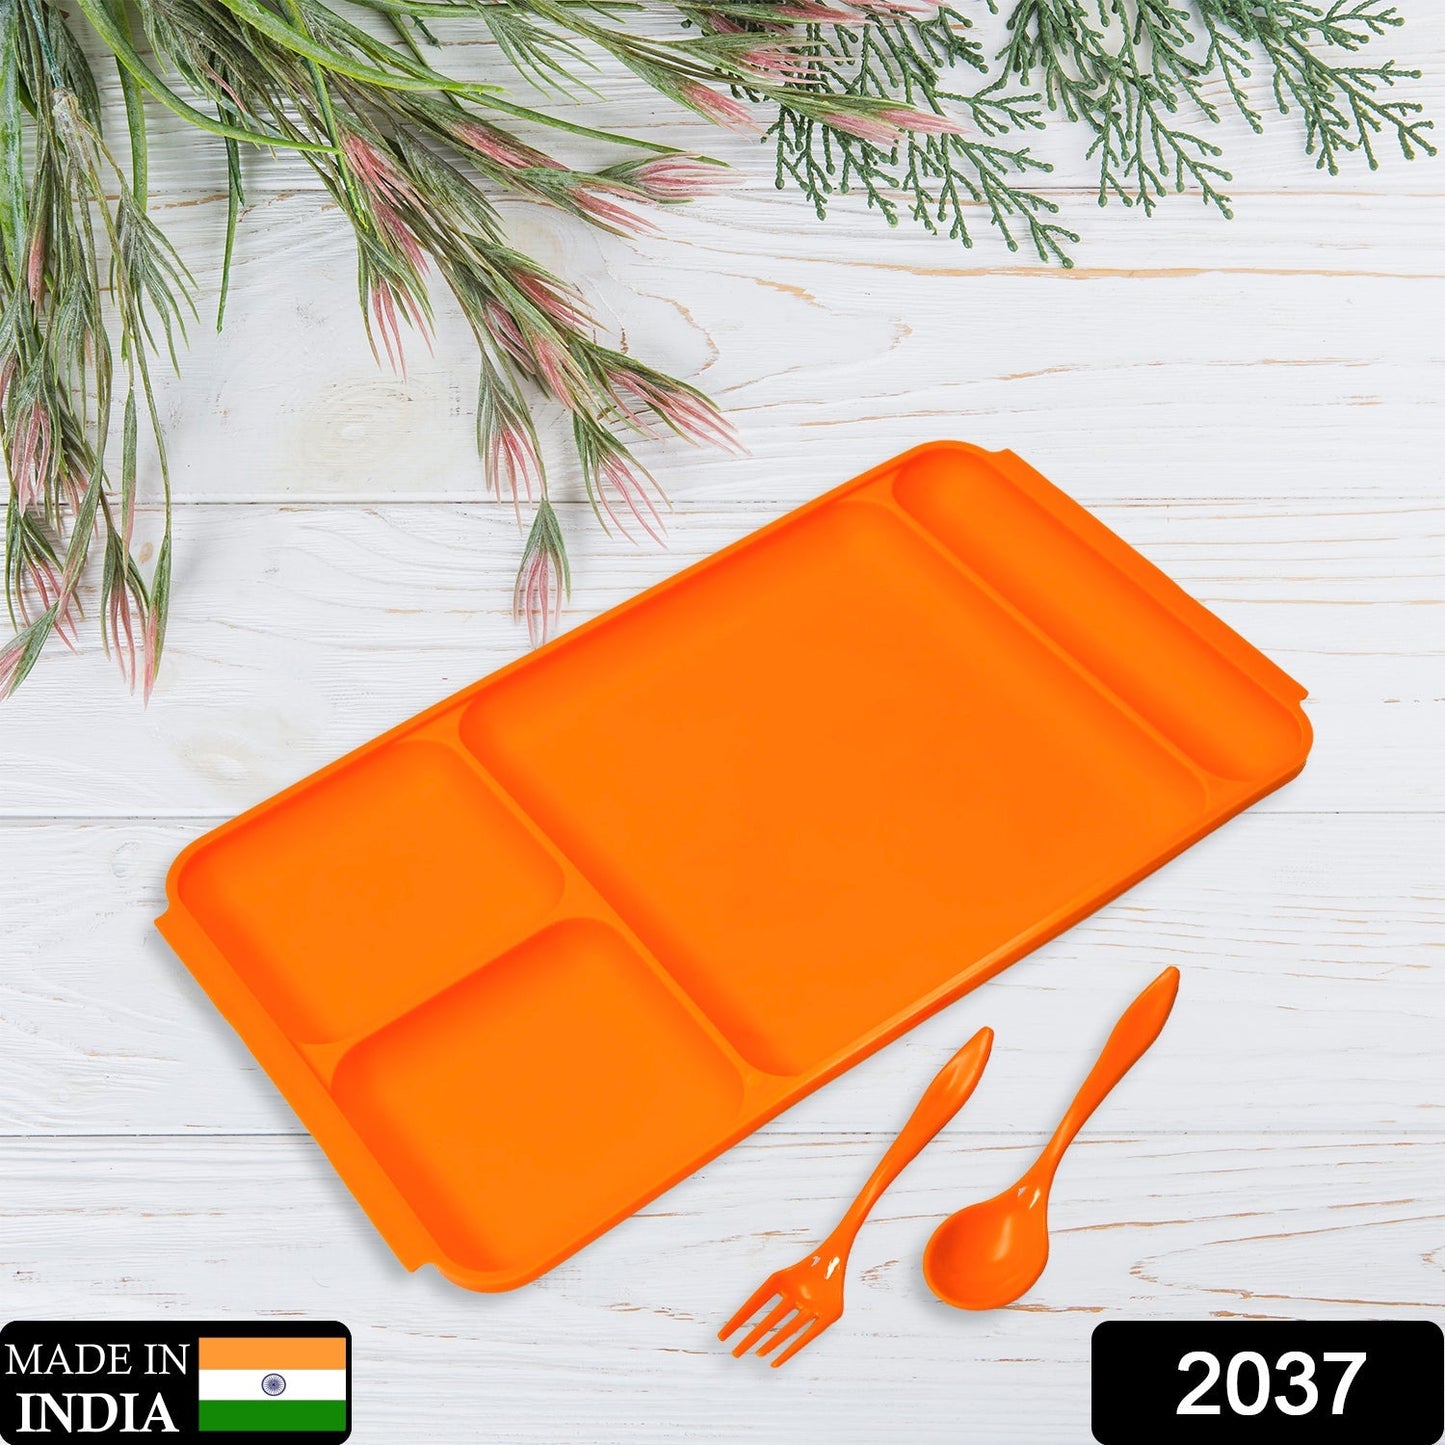 2037 4Compartment Dish with Spoon and Fork(2 Dish Set with 1Spoon and 1Fork) Dinner Plate Plastic Compartment Plate Pav Bhaji Plate 4-Compartments Divided Plastic Food Plate. DeoDap